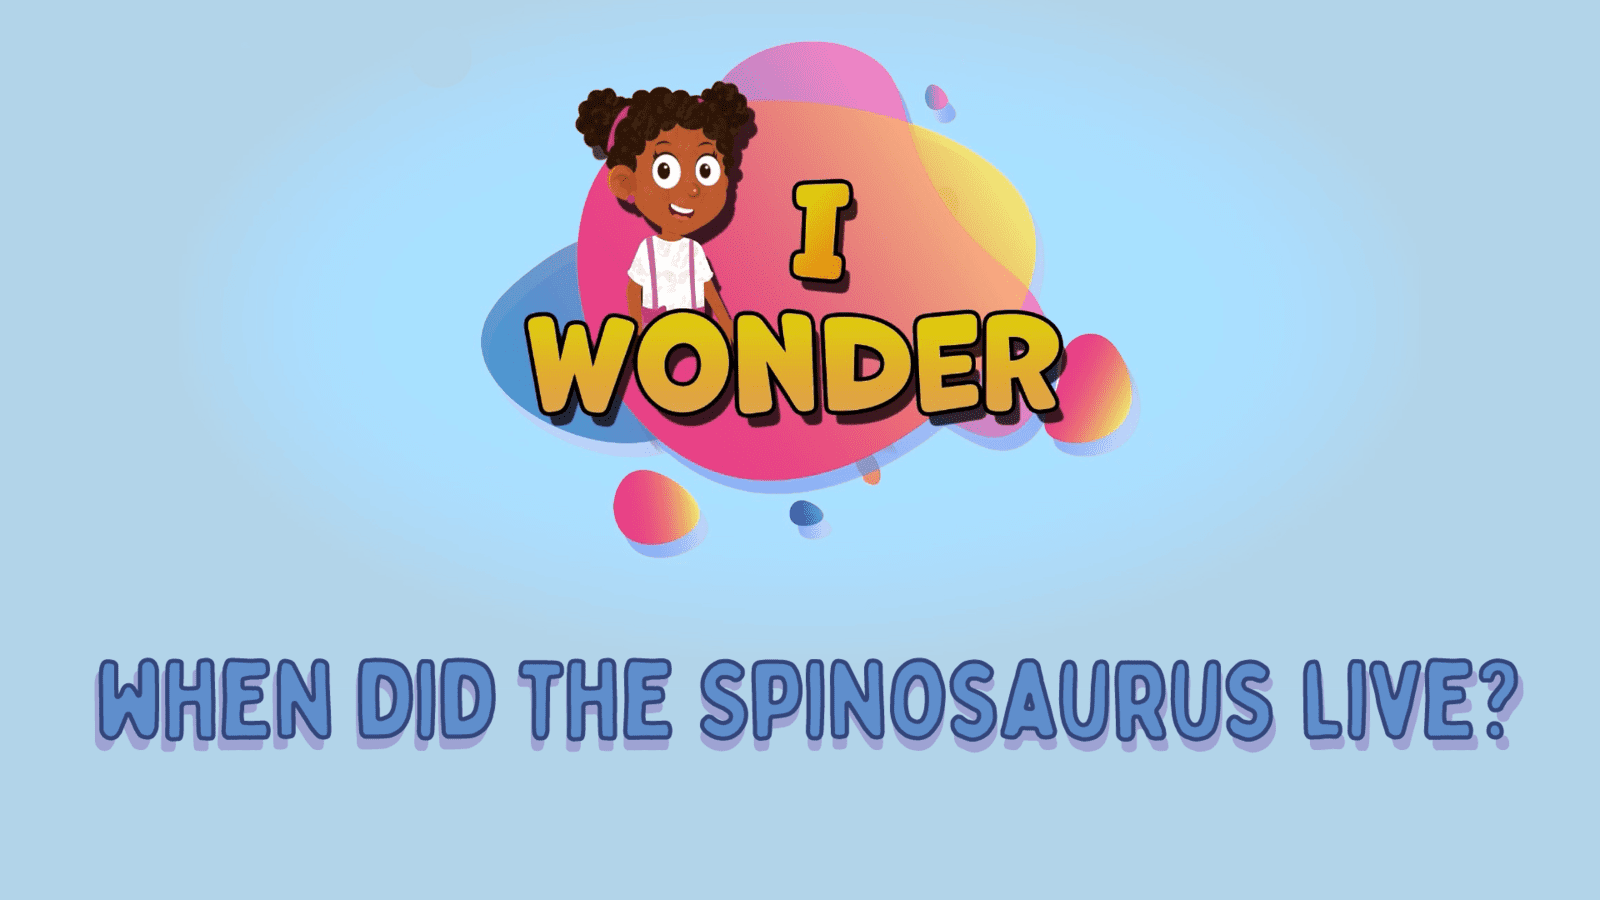 When Did The Spinosaurus Live?